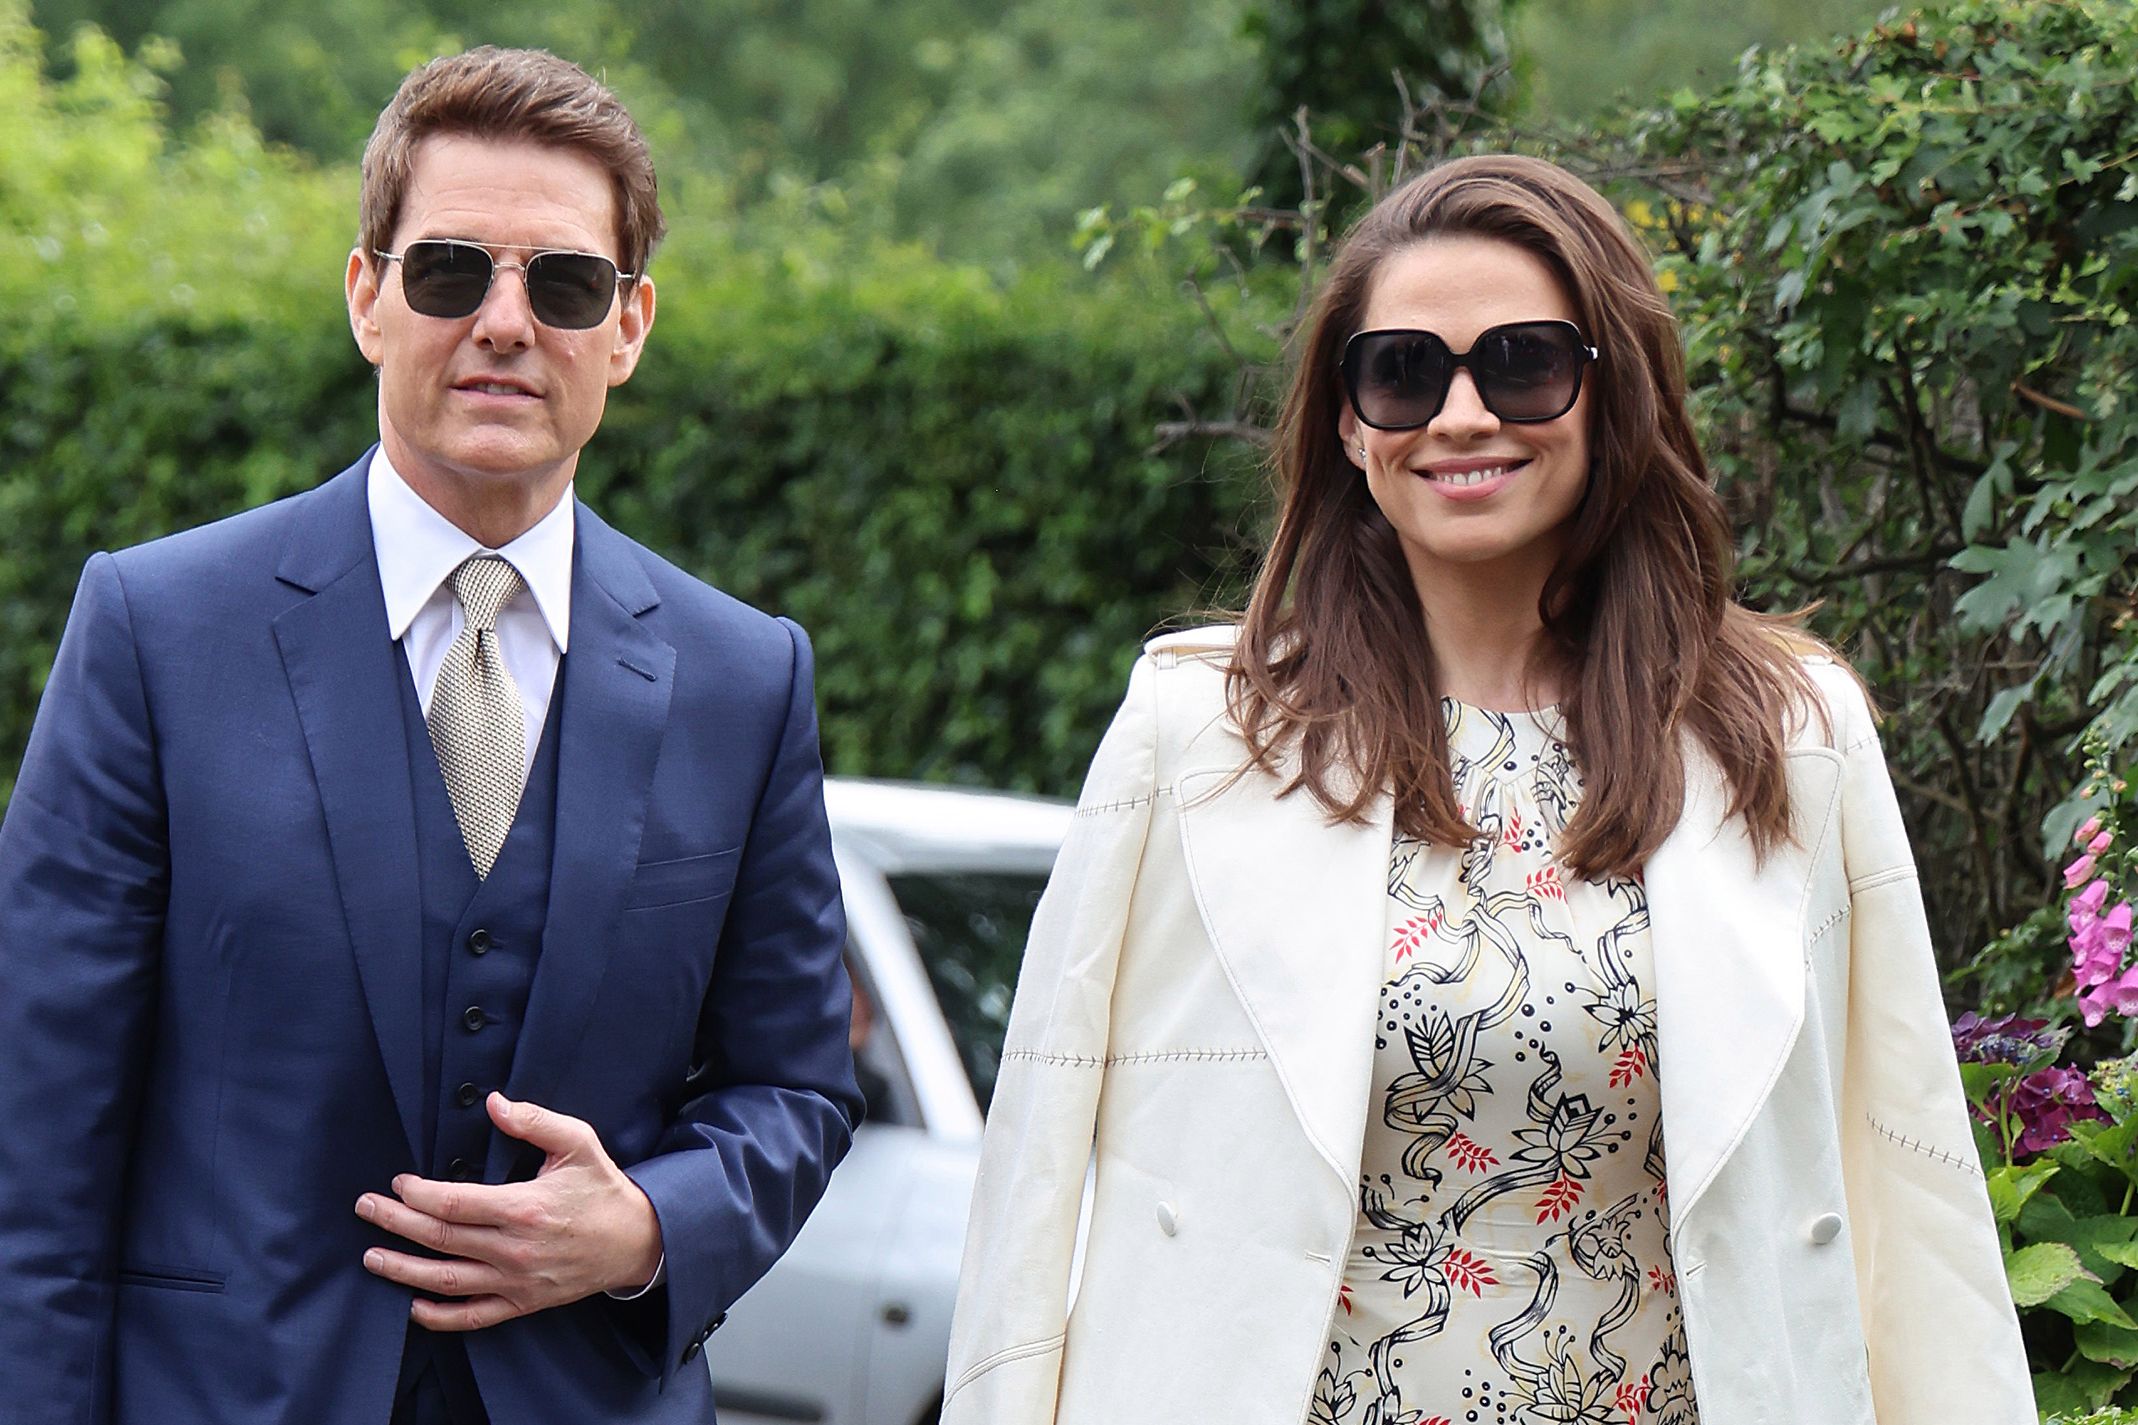 Tom Cruise and rumored girlfriend Hayley Atwell attend Wimbledon together